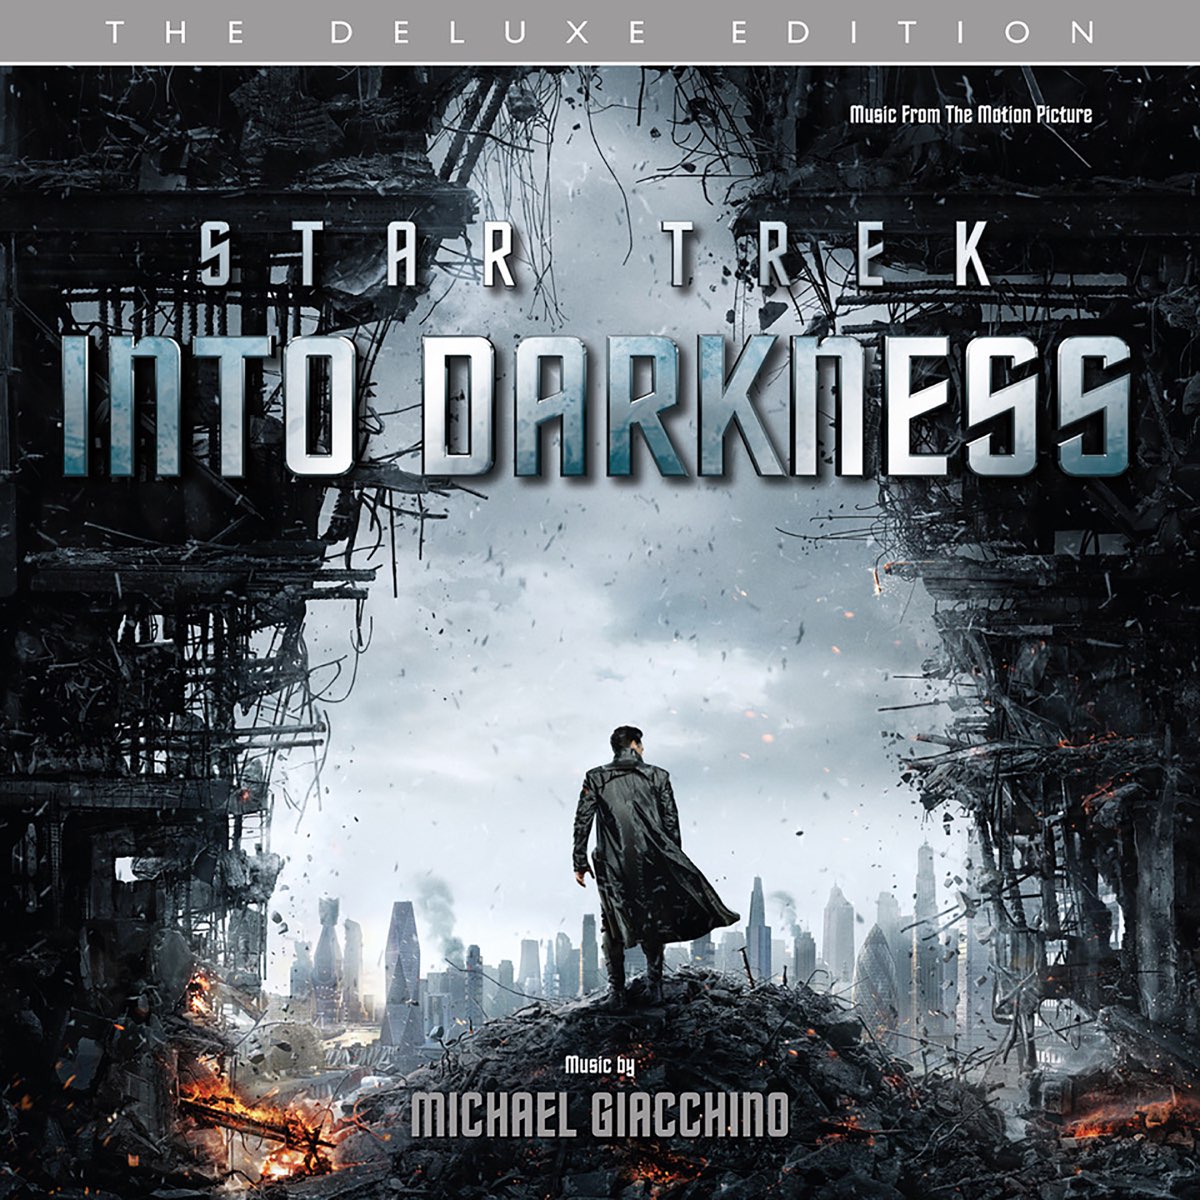 who wrote star trek into darkness